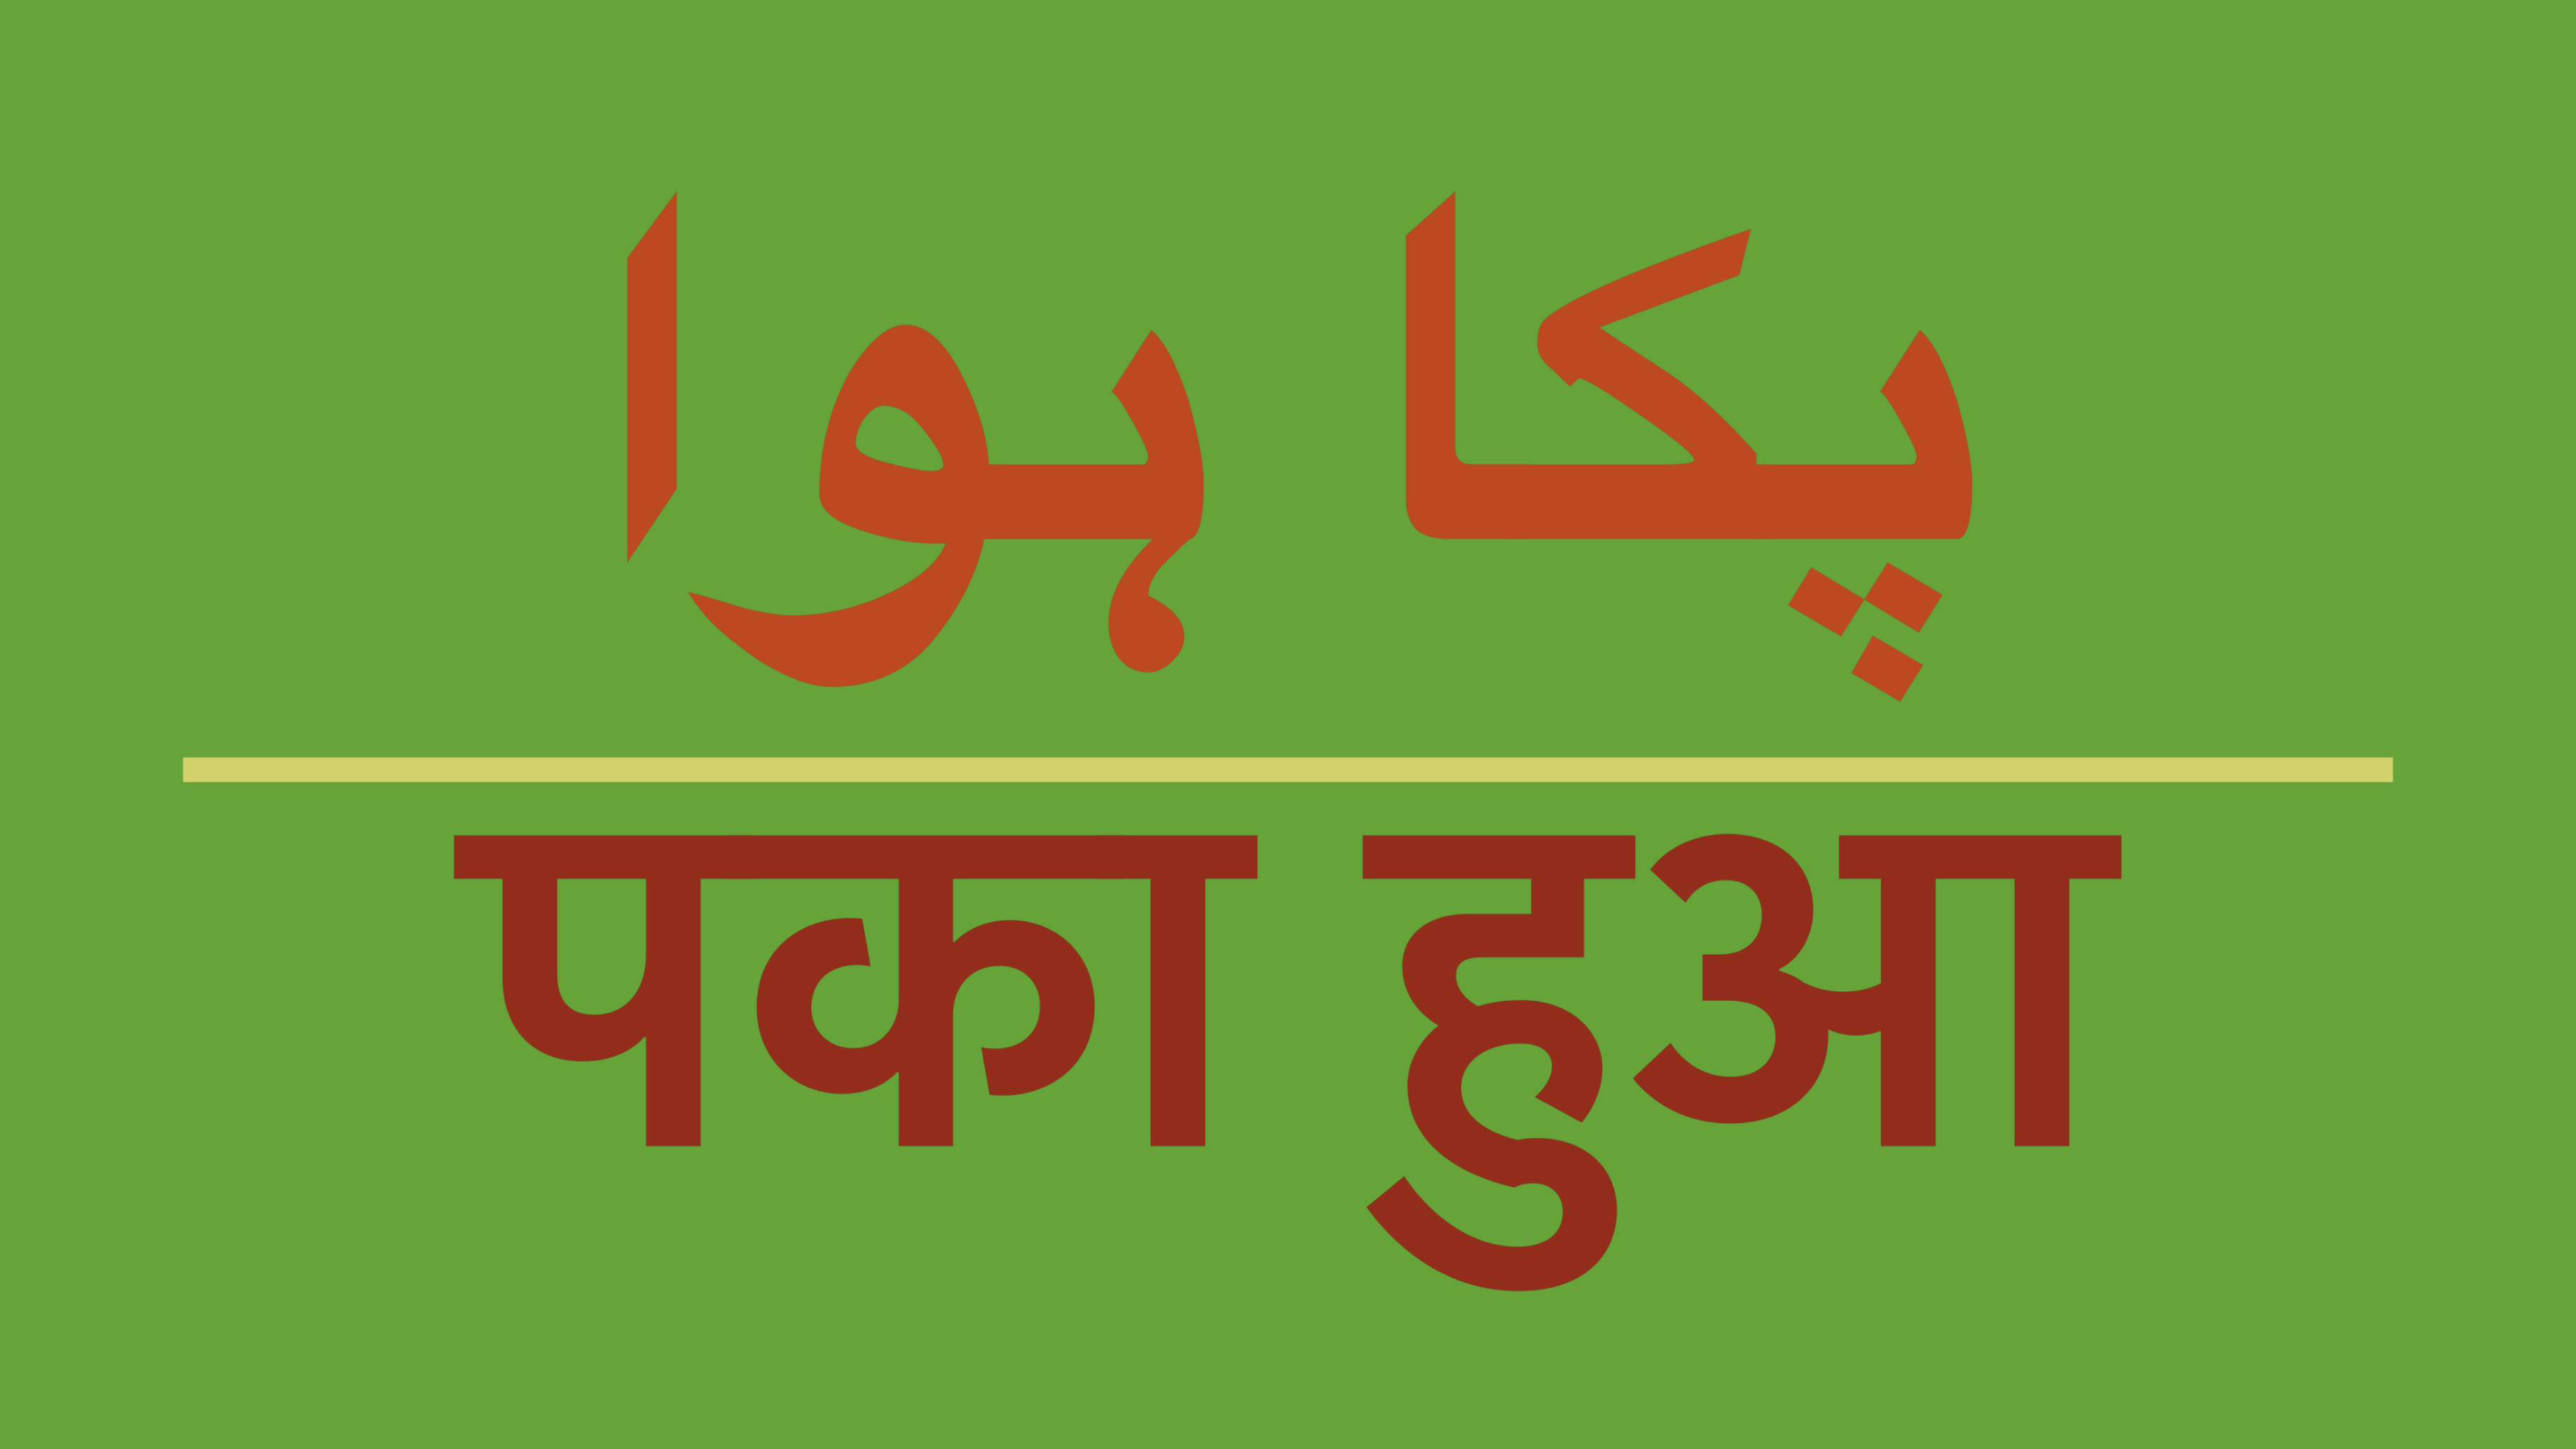 Hindi and Urdu: A language divided, or a shared history destroyed? -  Cherwell